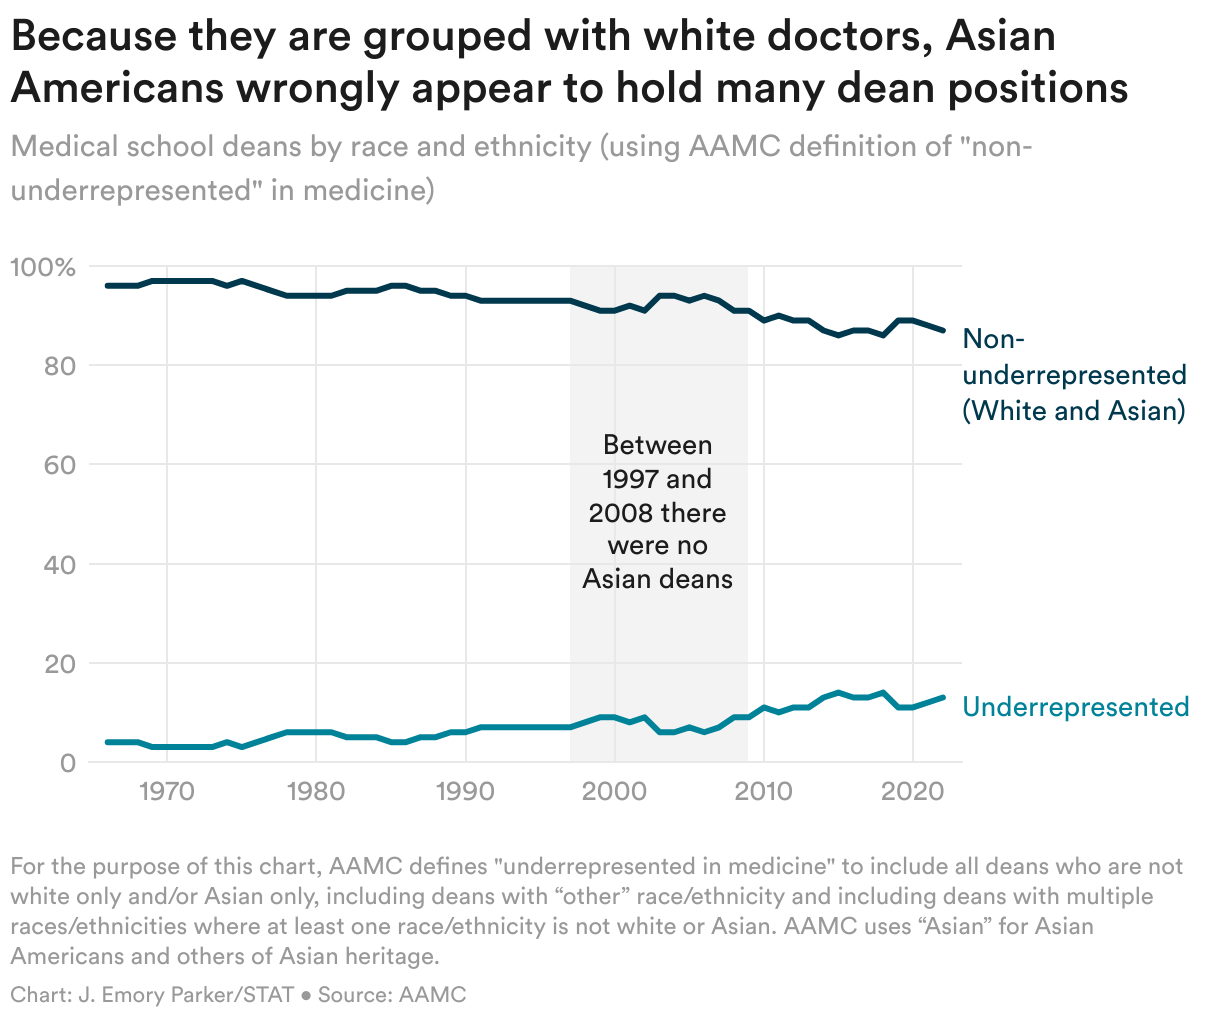 Non-underrepresented groups appear to hold over 90% of medical school deanships, but in many years there were zero Asian deans.